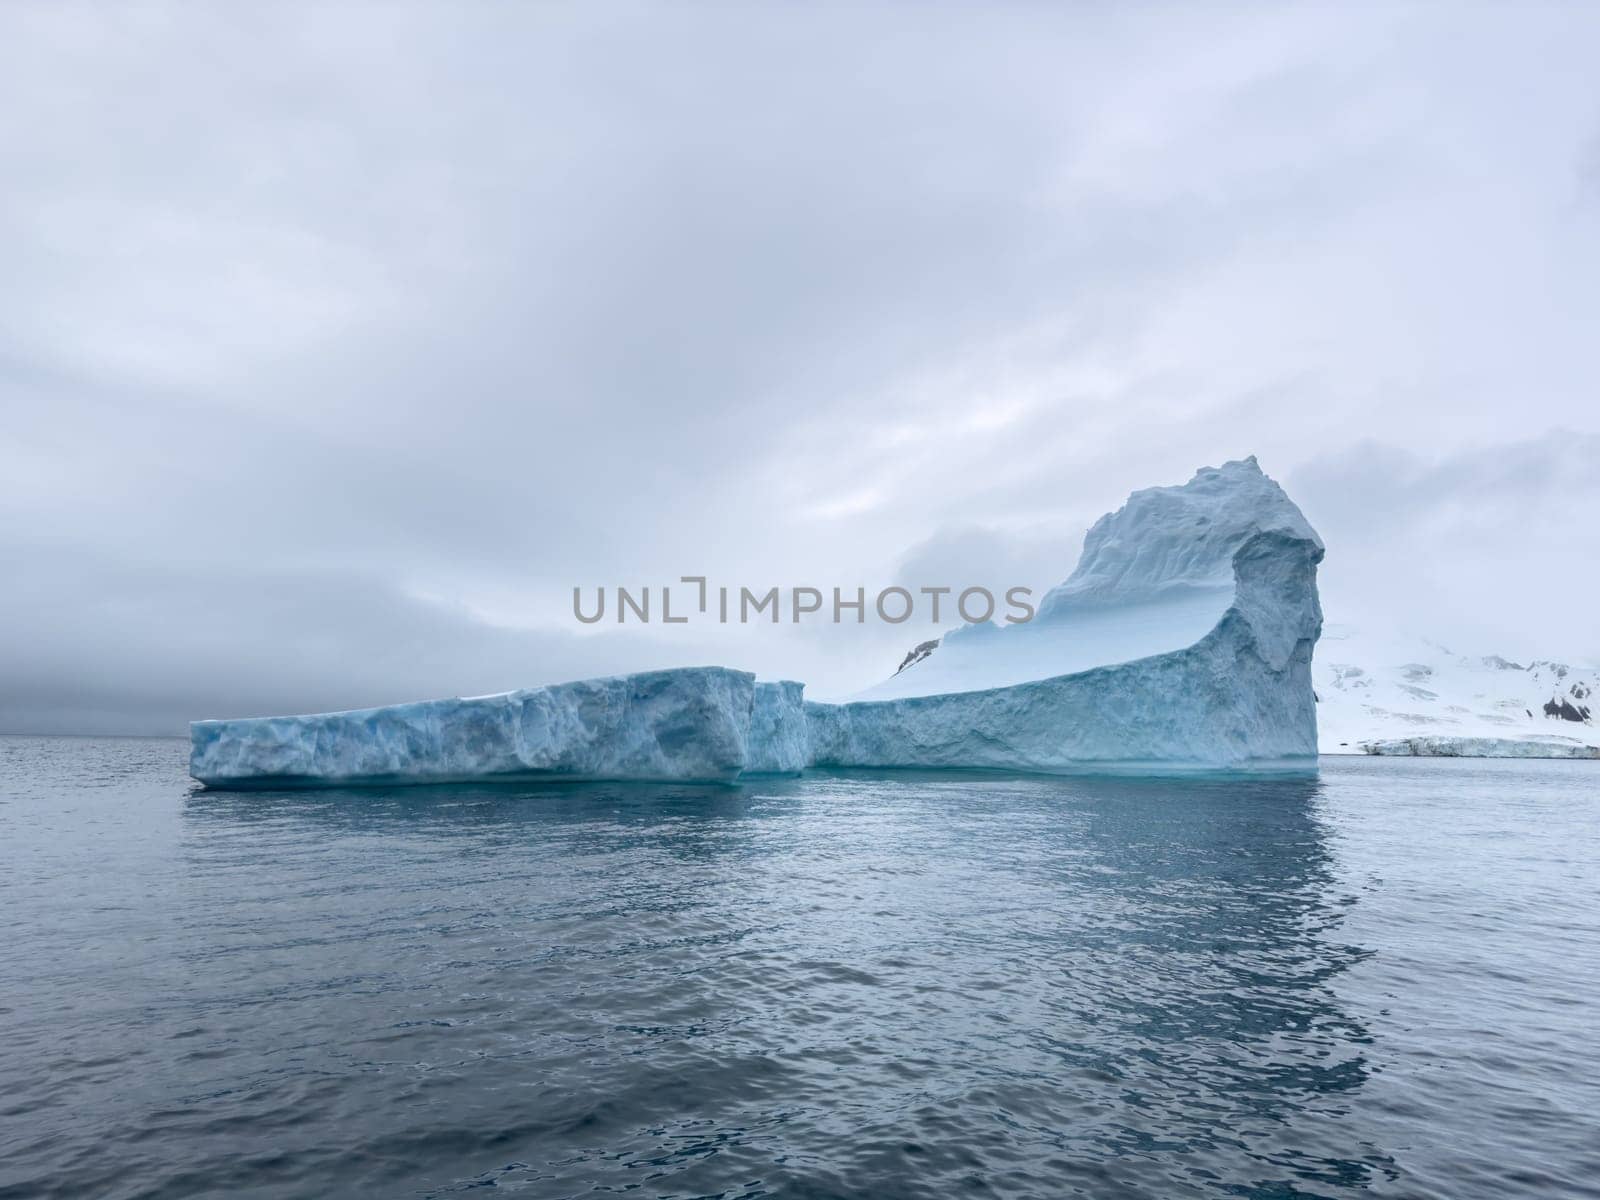 A huge high breakaway glacier drifts in the southern ocean off the coast of Antarctica at sunset, the Antarctic Peninsula, the Southern Arctic Circle, azure water, cloudy weather by vladimirdrozdin